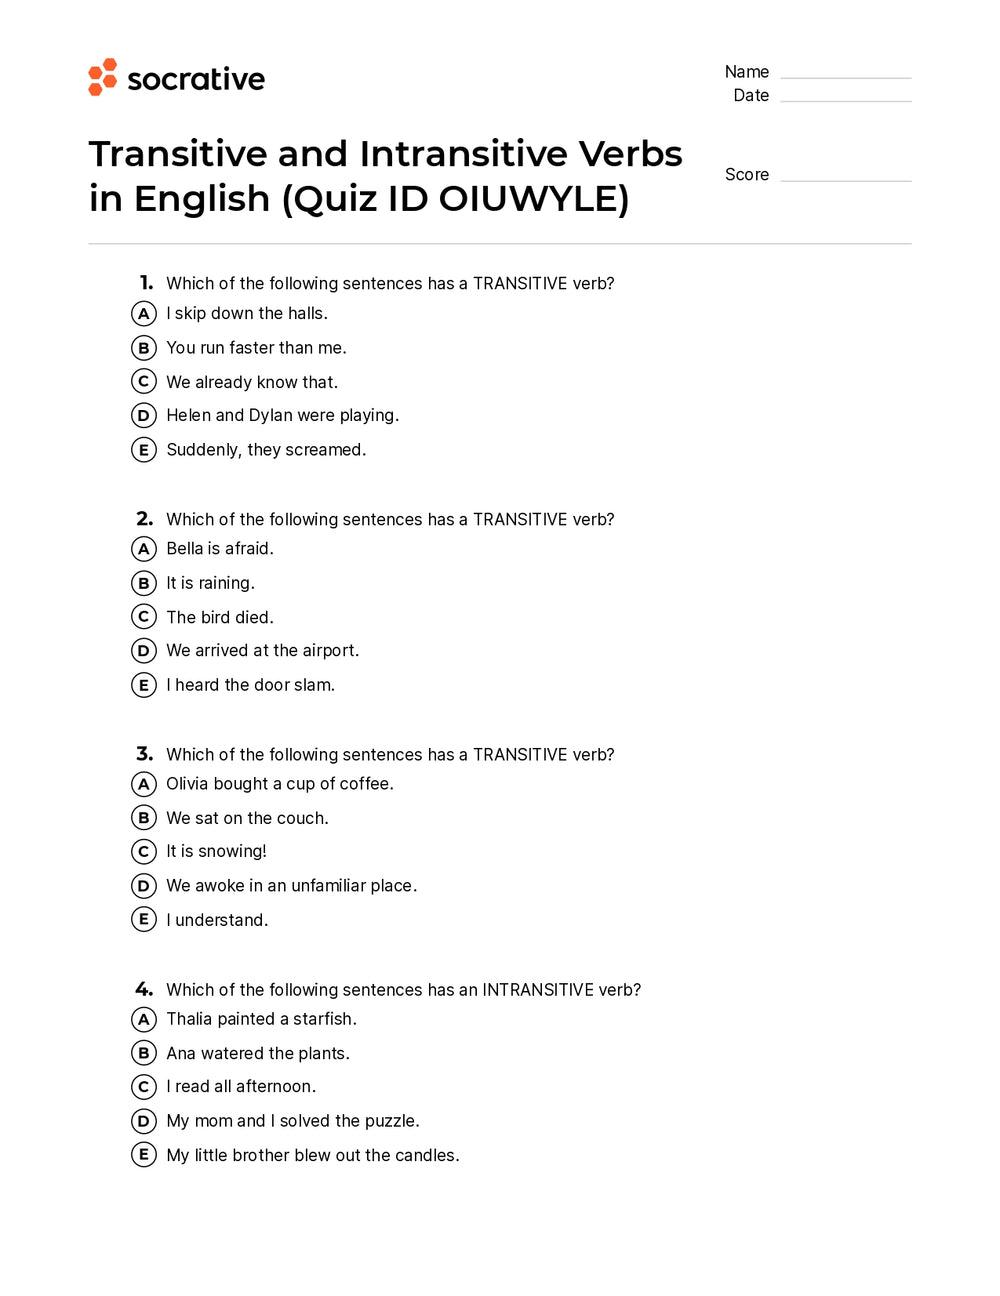 transitive-and-intransitive-verbs-in-english-quiz-shop